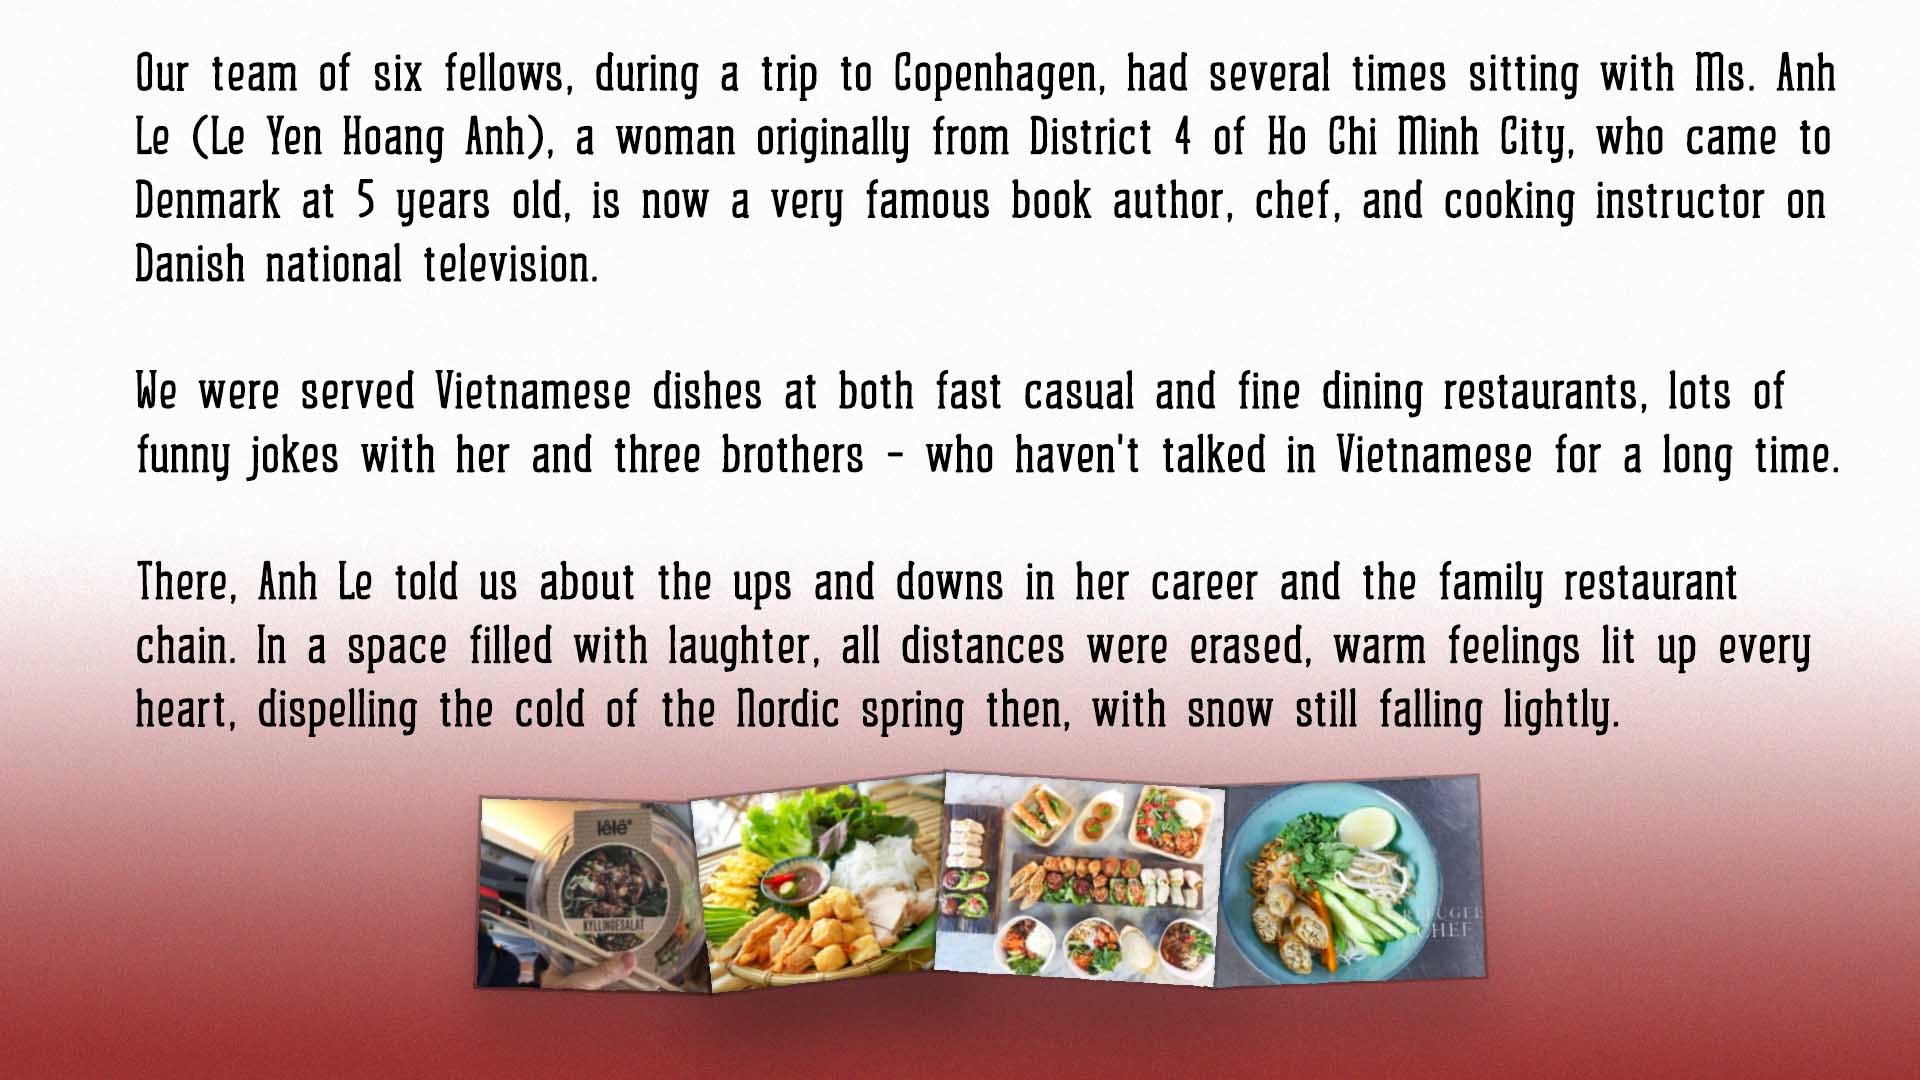 Inspriring Chef Anh Le and her longing for Vietnam